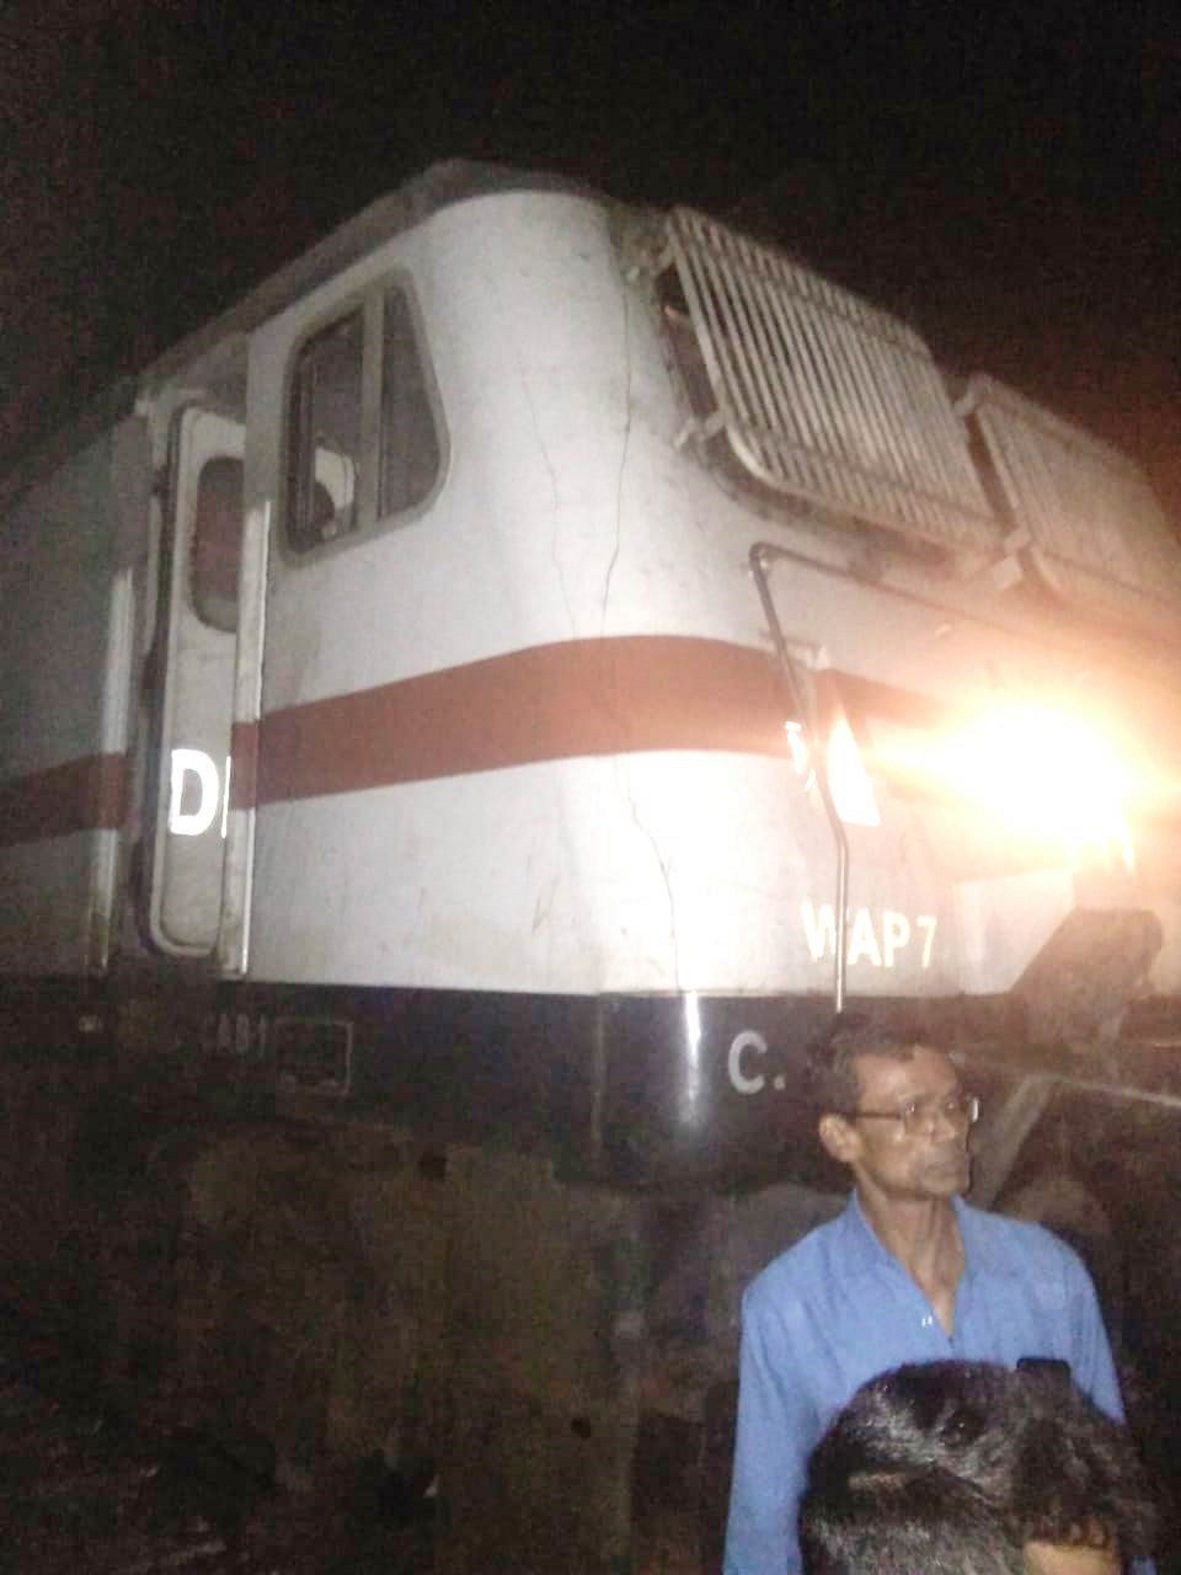 Driver promptly turned a major rail accident